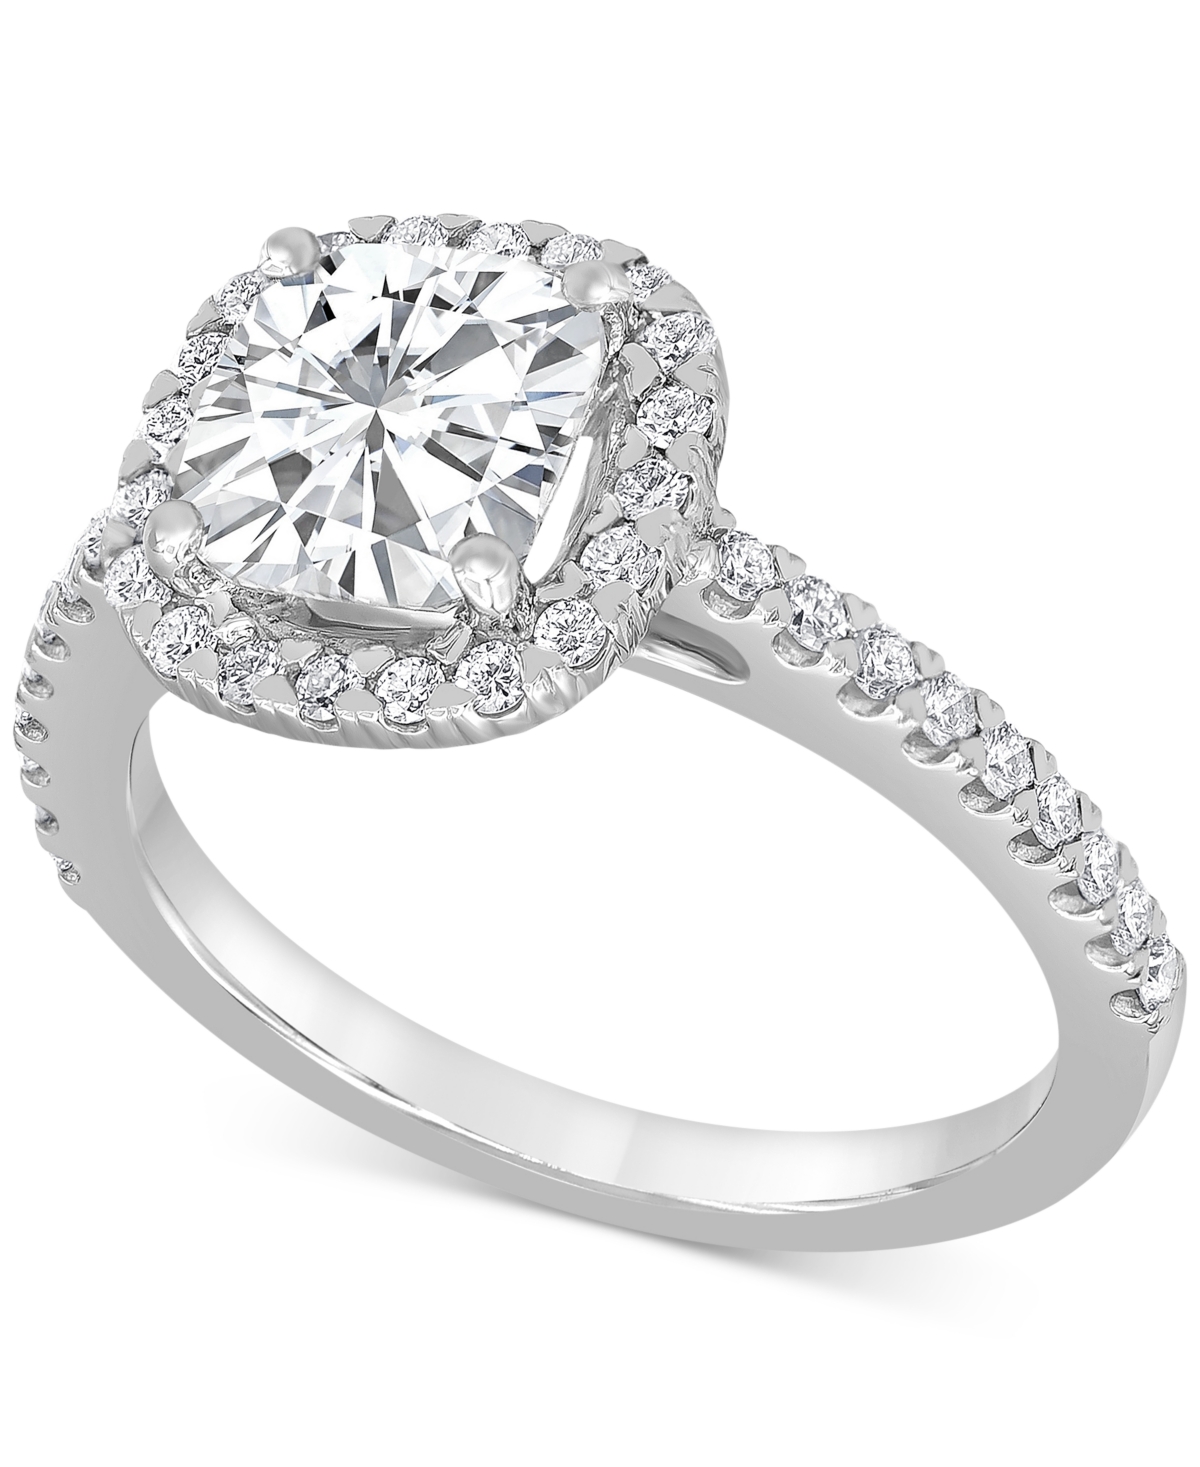 Badgley Mischka Certified Lab Grown Diamond Halo Engagement Ring (2-1/2 ct. t.w.) in 14k White Gold